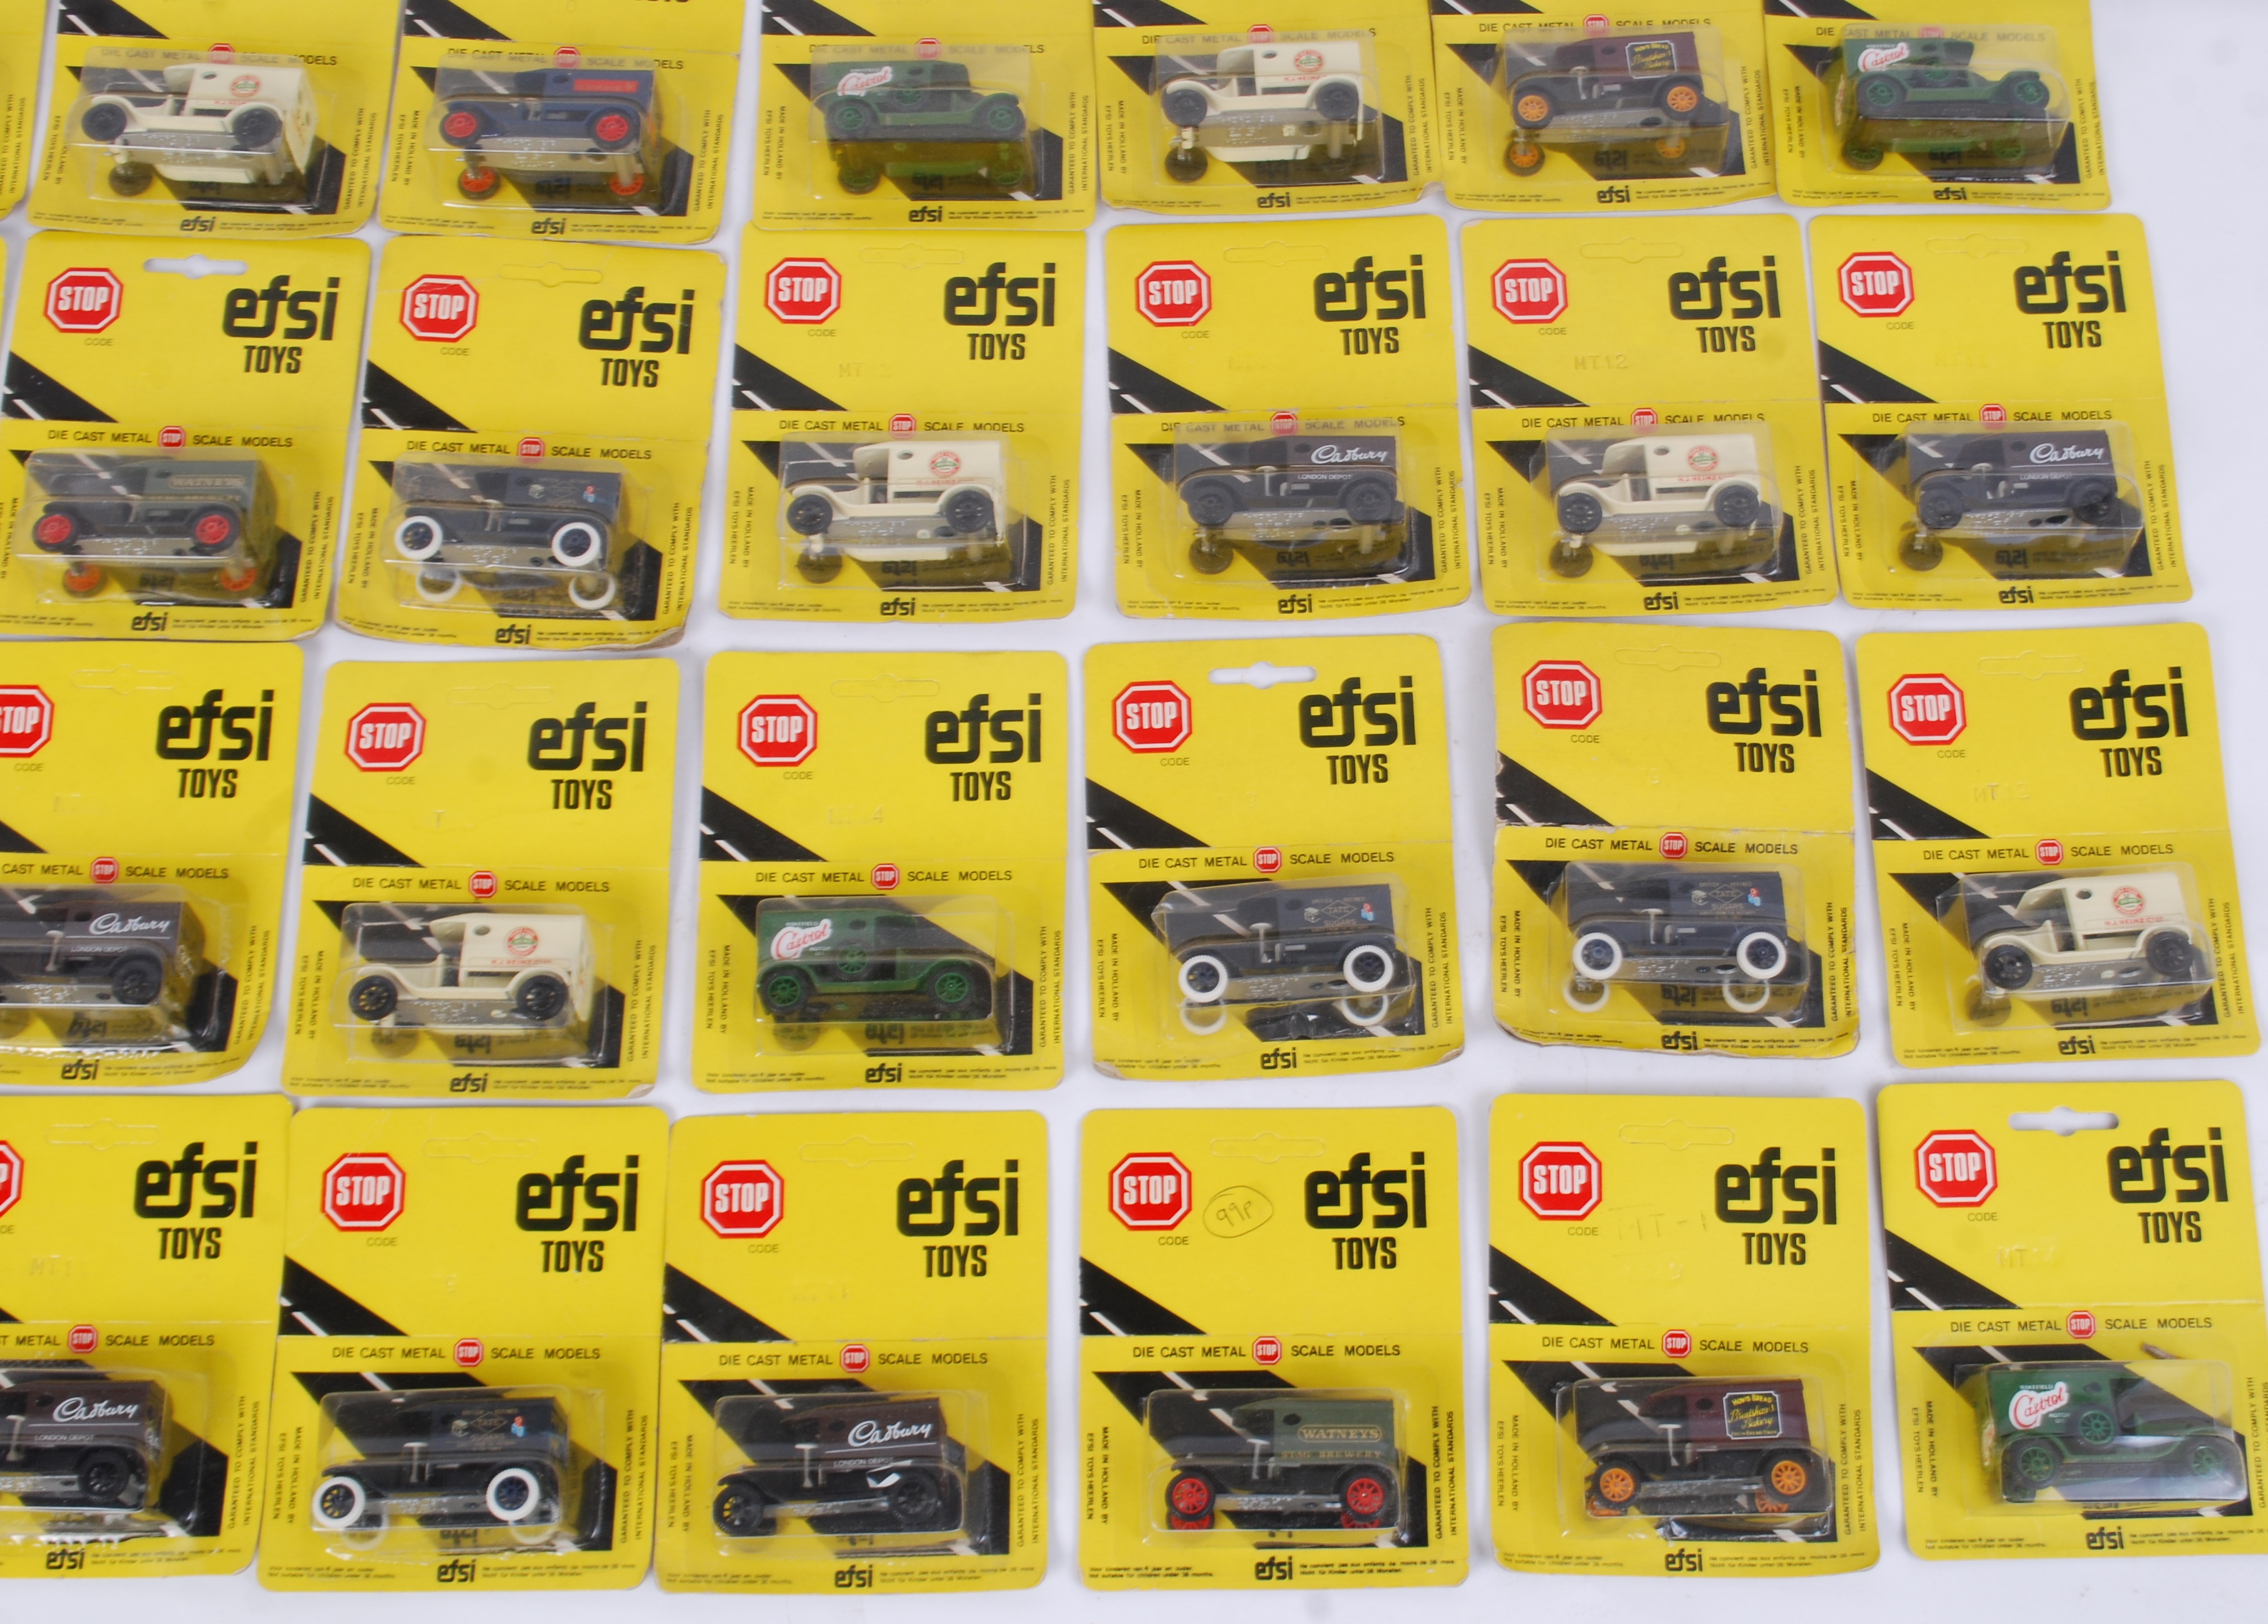 EFSI: A LARGE collection of vintage EFSI Toys diecast model cars. - Image 4 of 5